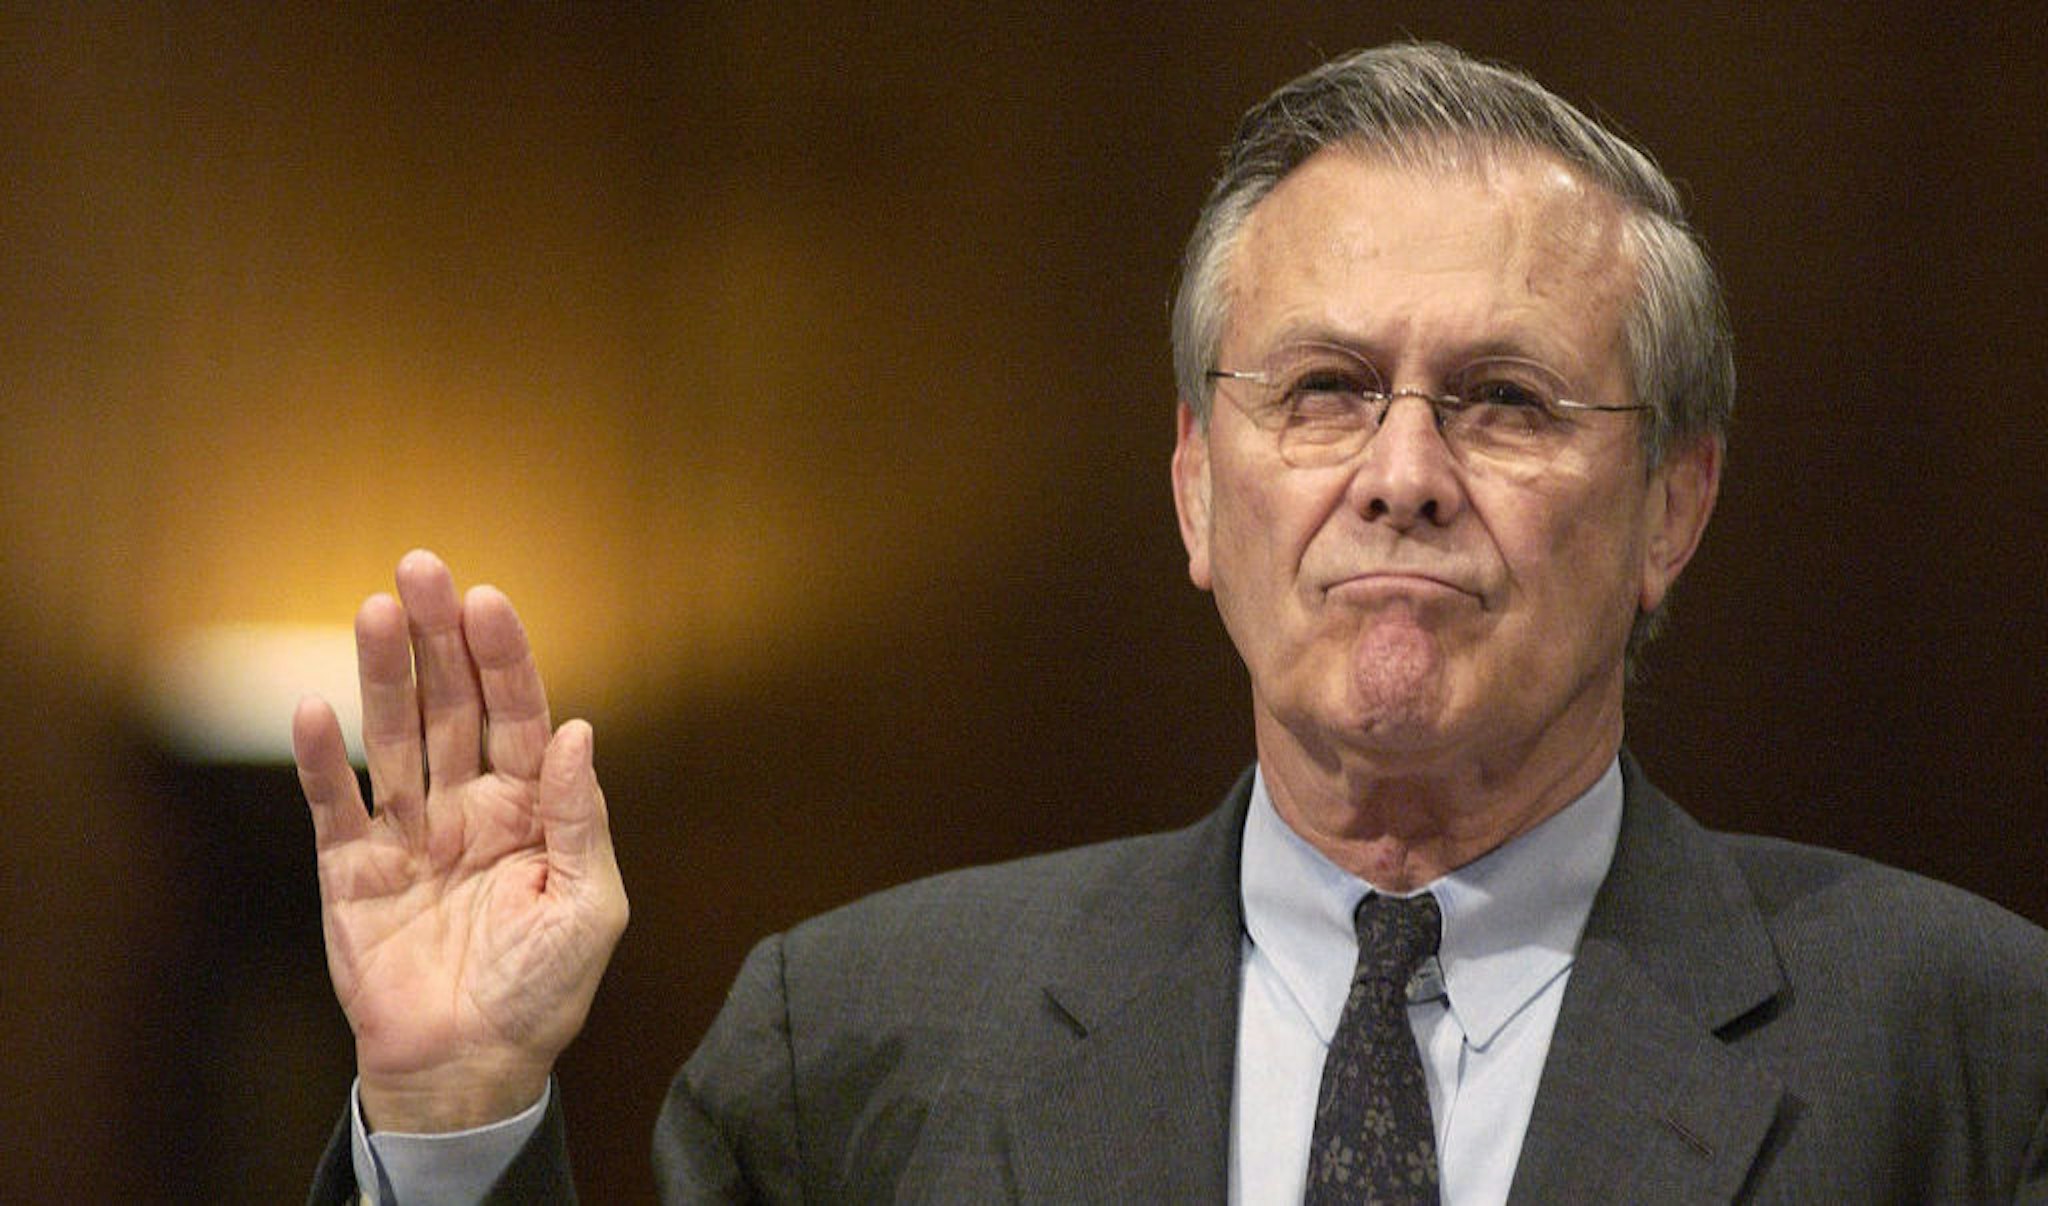 US Secretary of Defense Donald Rumsfeld is sworn in before the Senate Armed Services Committee in Washington, DC before testifying on abuses at a military prison in Iraq on May 7, 2004. Donald Rumsfeld, the defense secretary who became the face of U.S. foreign policy under President George W. Bush while the administration’s troop deployments toppled hostile regimes in Afghanistan and Iraq, has died on June 30, 2021.. He was 88. Photographer: Jay Mallin / Bloomberg